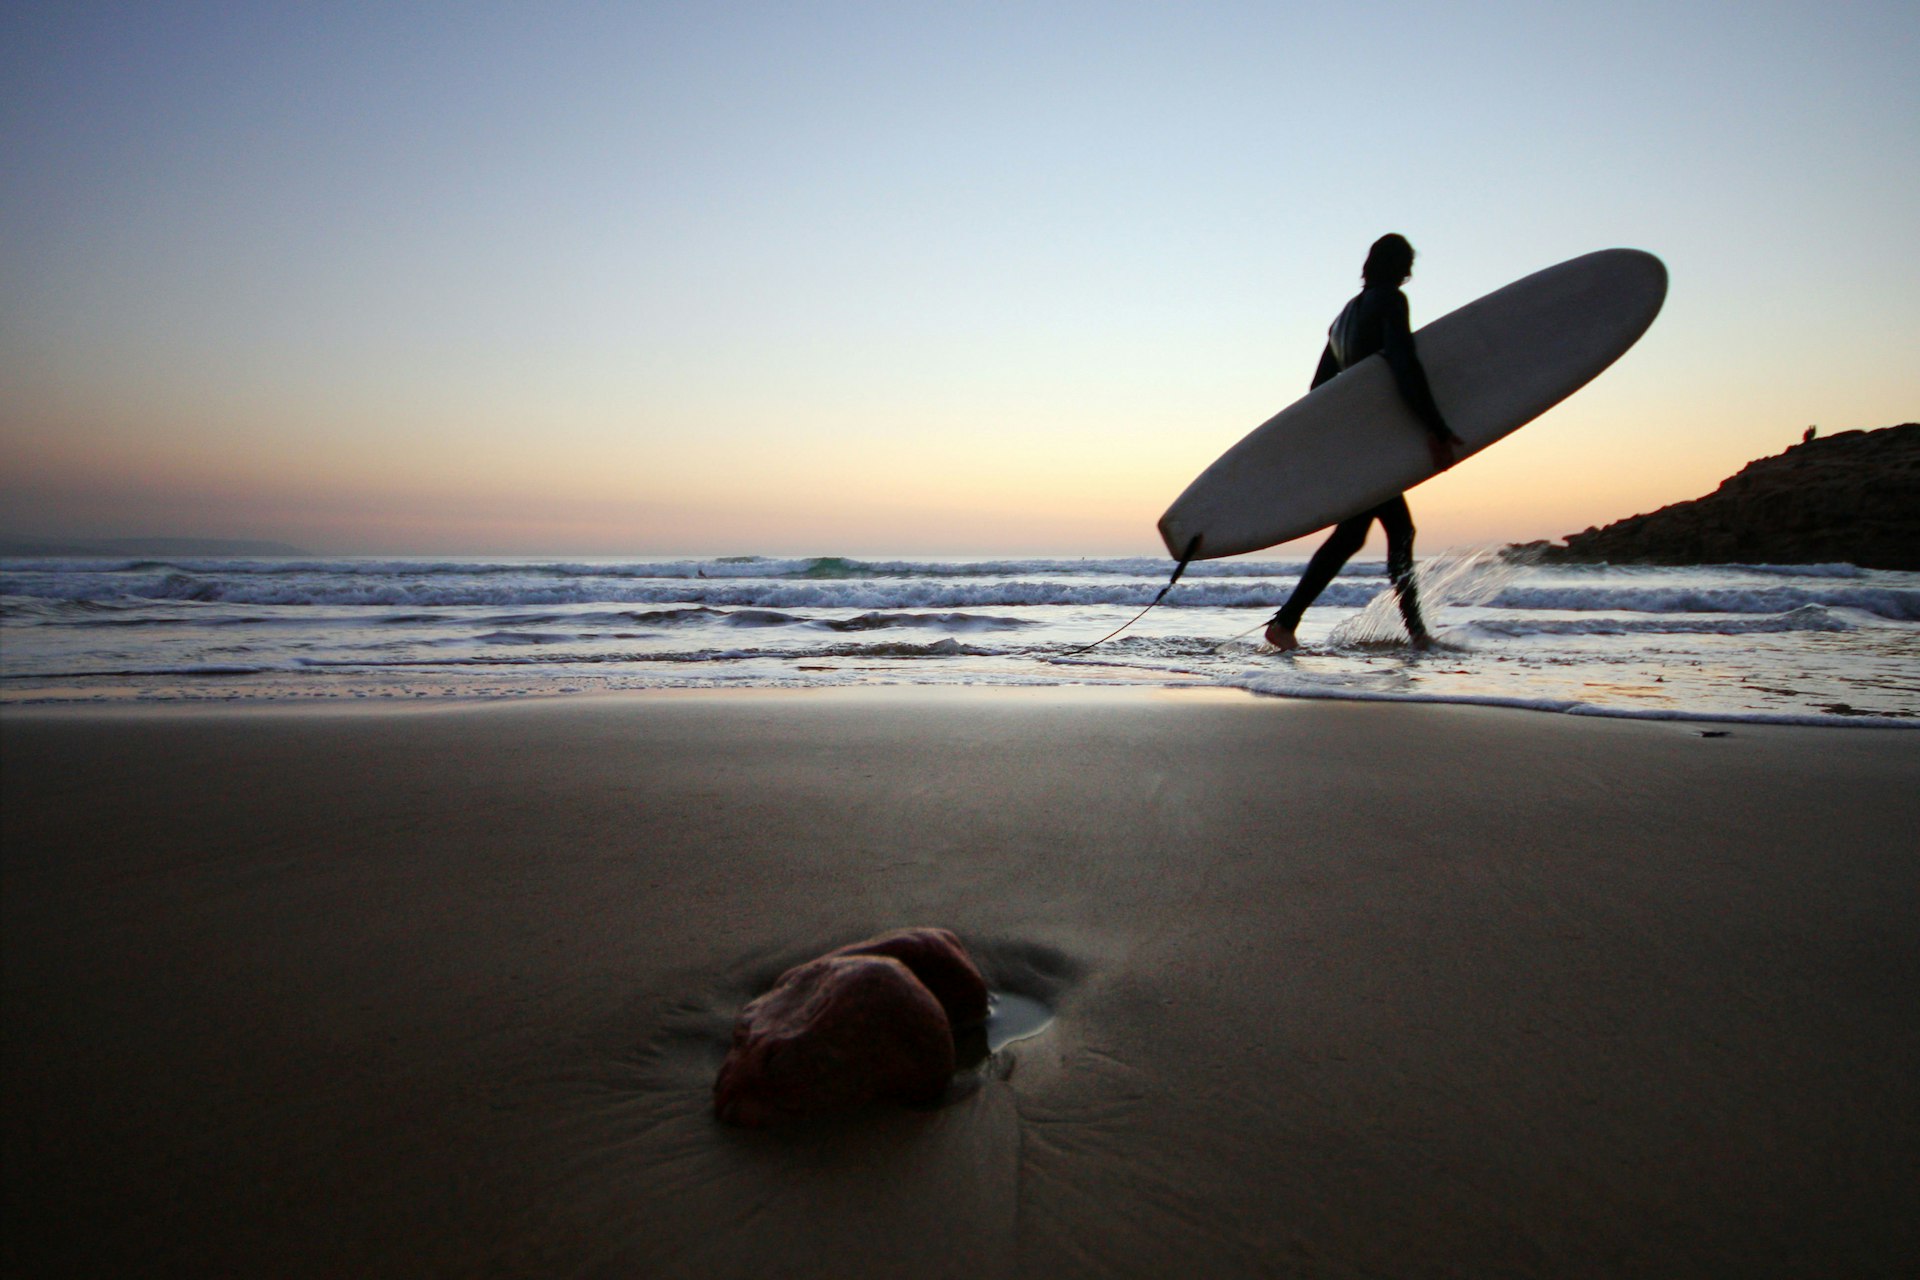 A surfer on the beach at sunset in Taghazout, Morocco